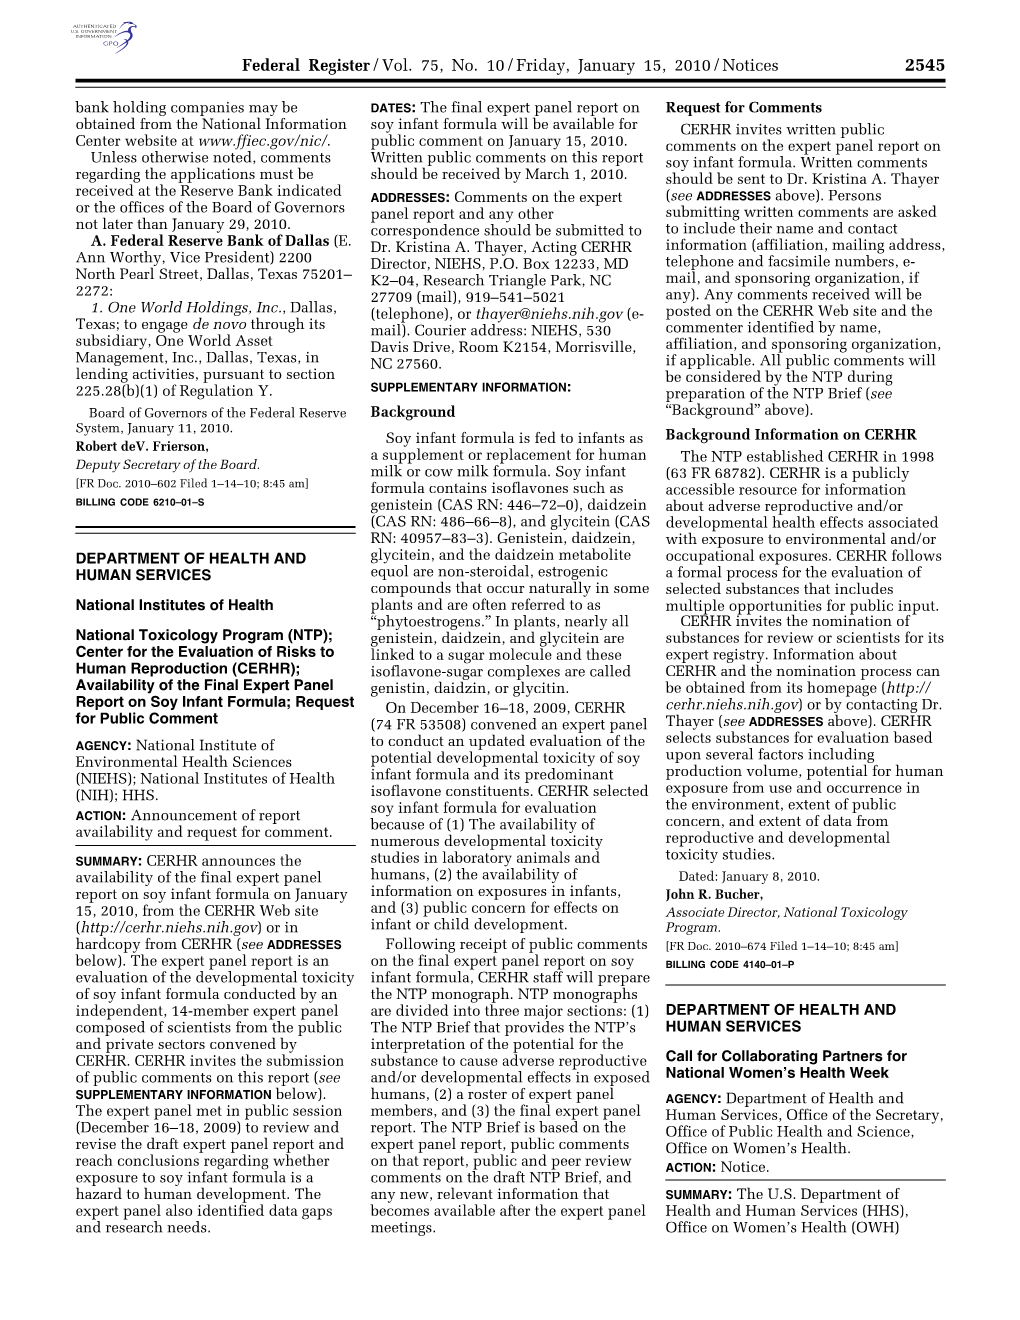 Federal Register/Vol. 75, No. 10/Friday, January 15, 2010/Notices